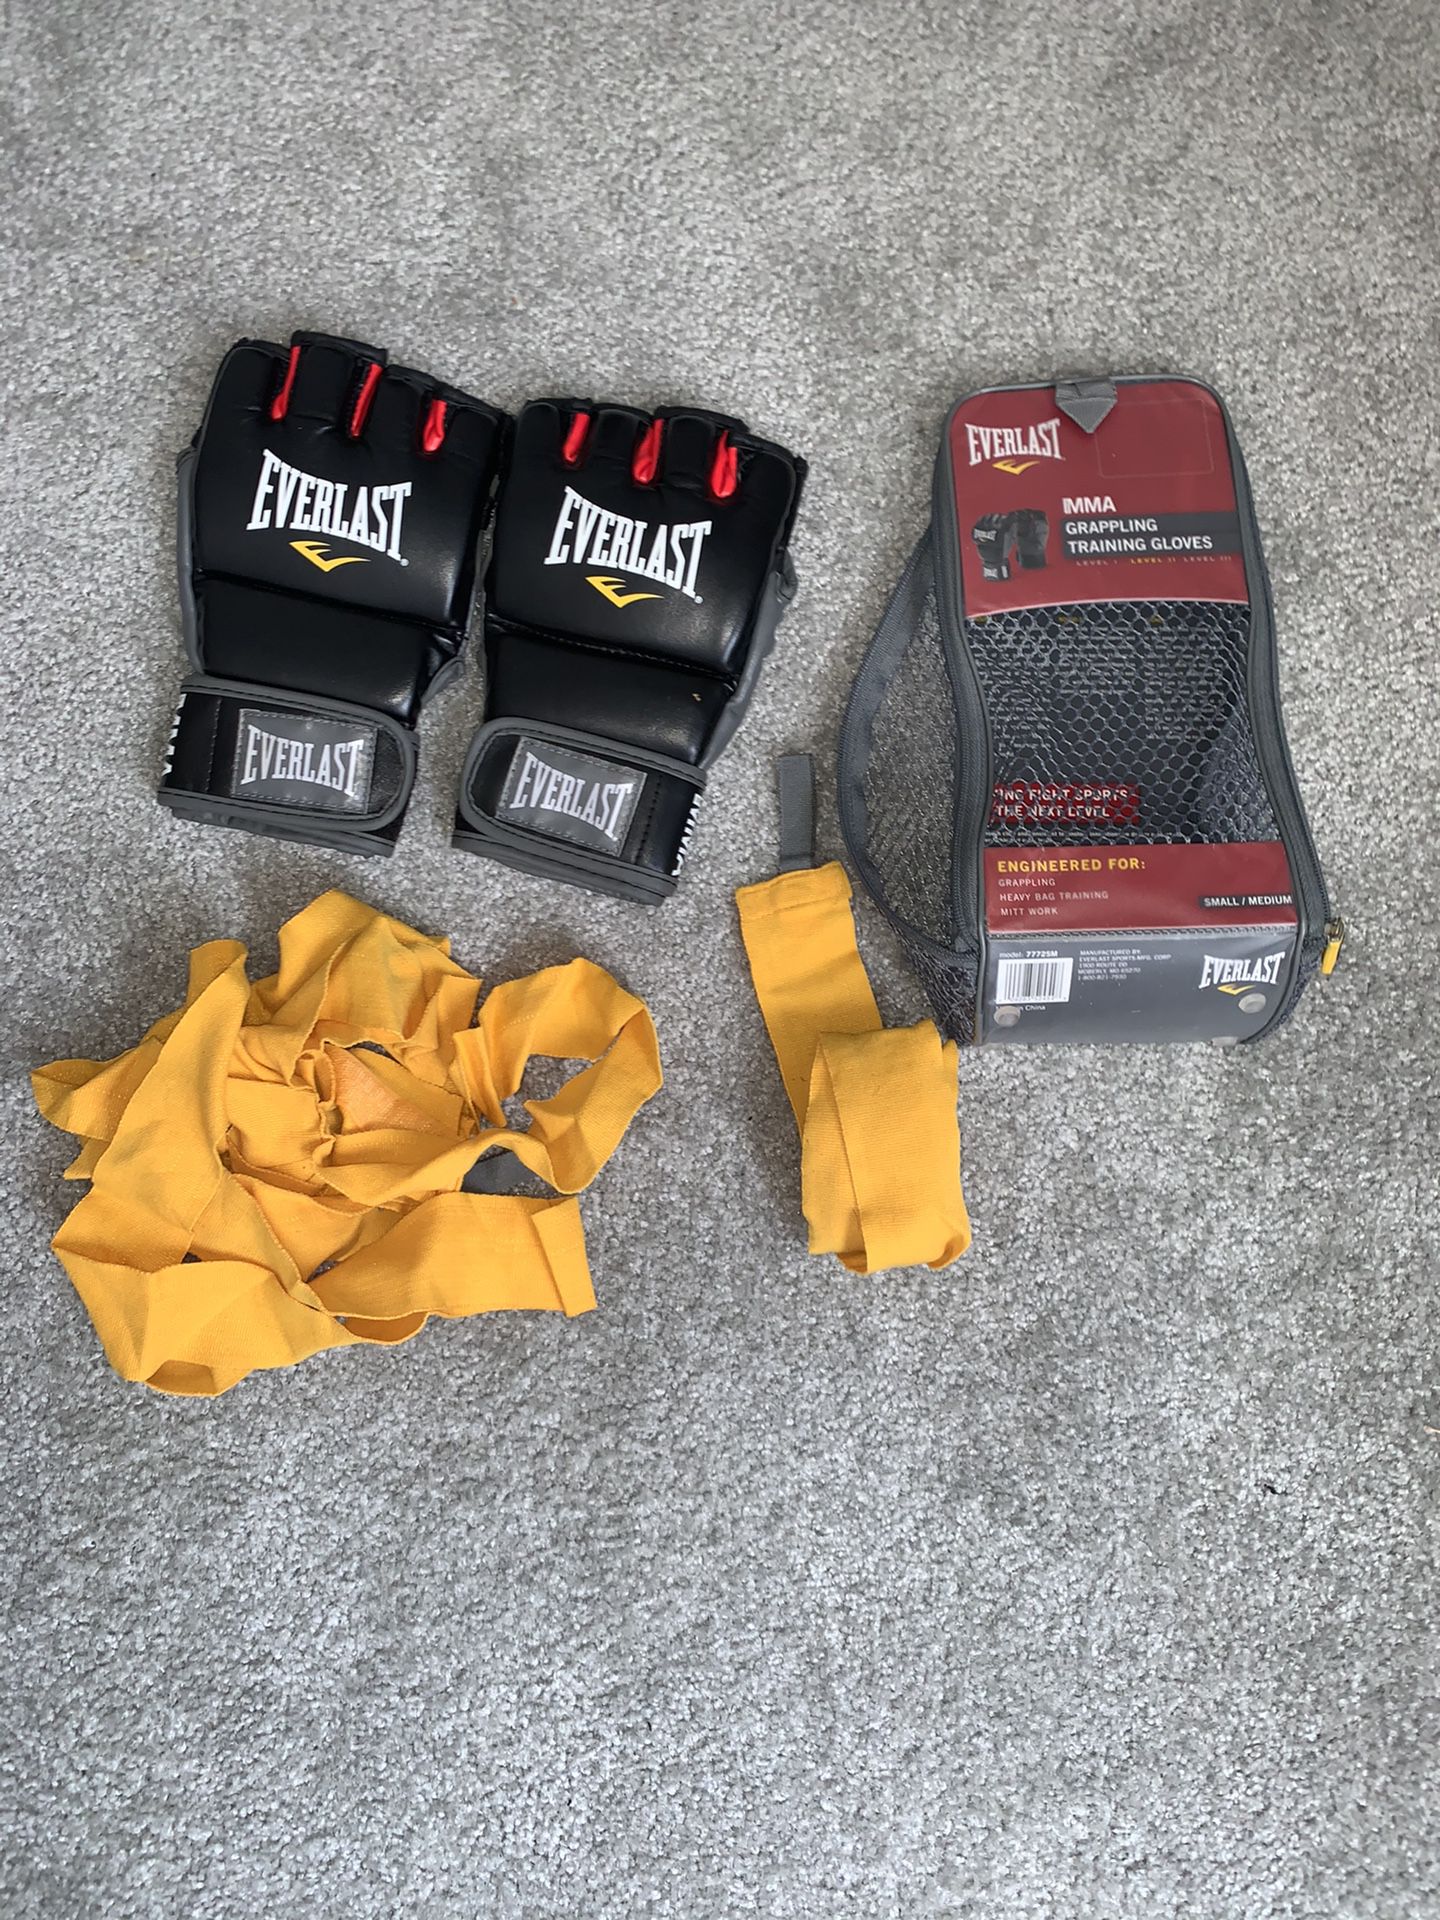 Everlast UFC/MMA gloves with wraps